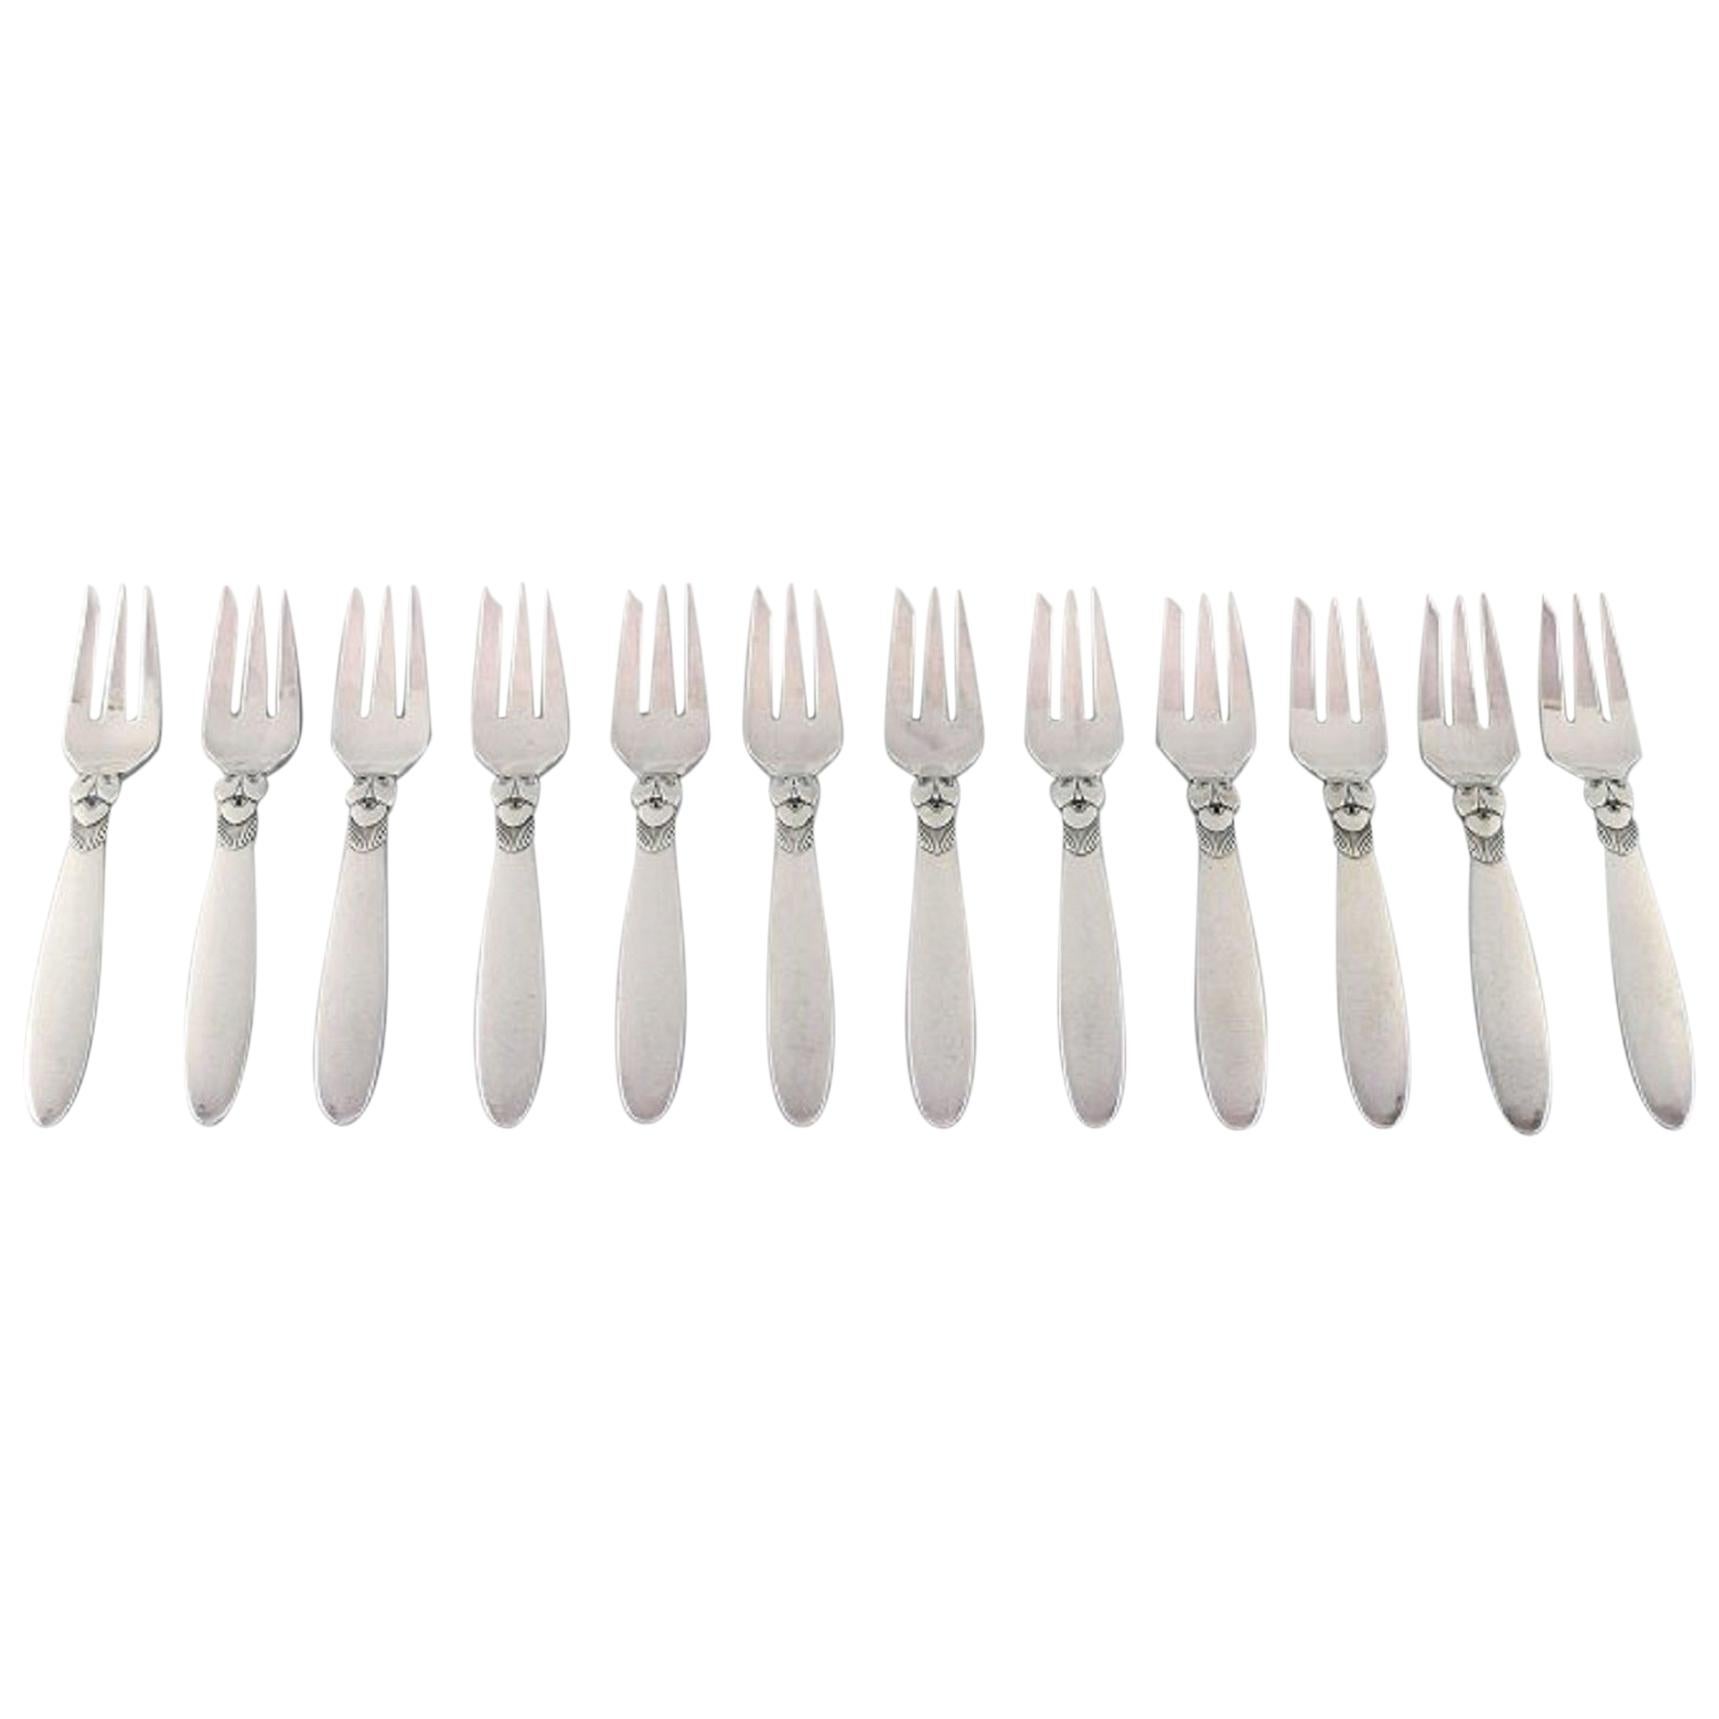 12 Georg Jensen Cactus Pastry Forks in Sterling Silver